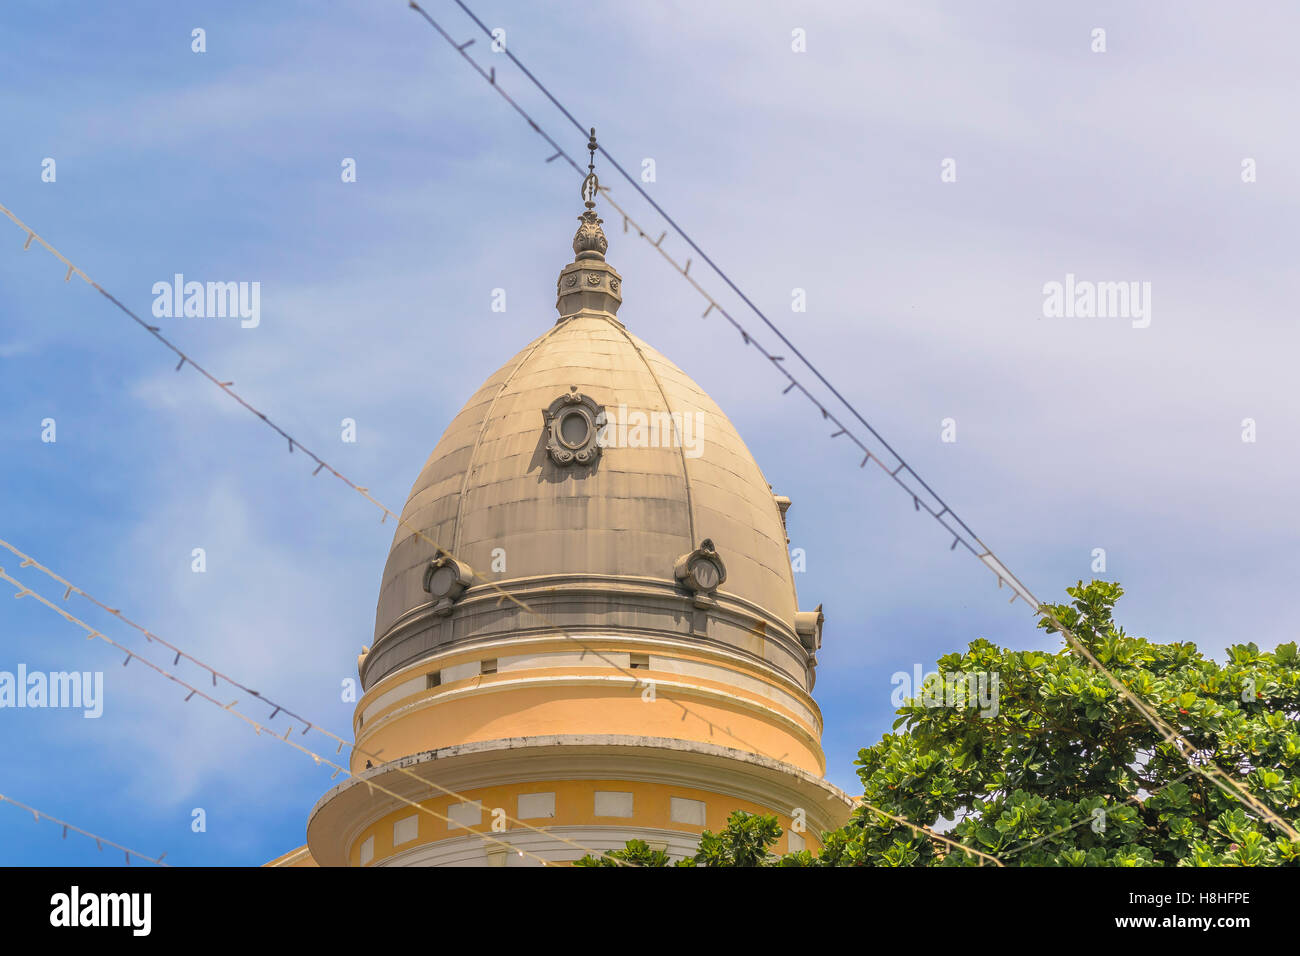 Old style building dome against blue sky in Recife, Pernambuco, Brazil Stock Photo